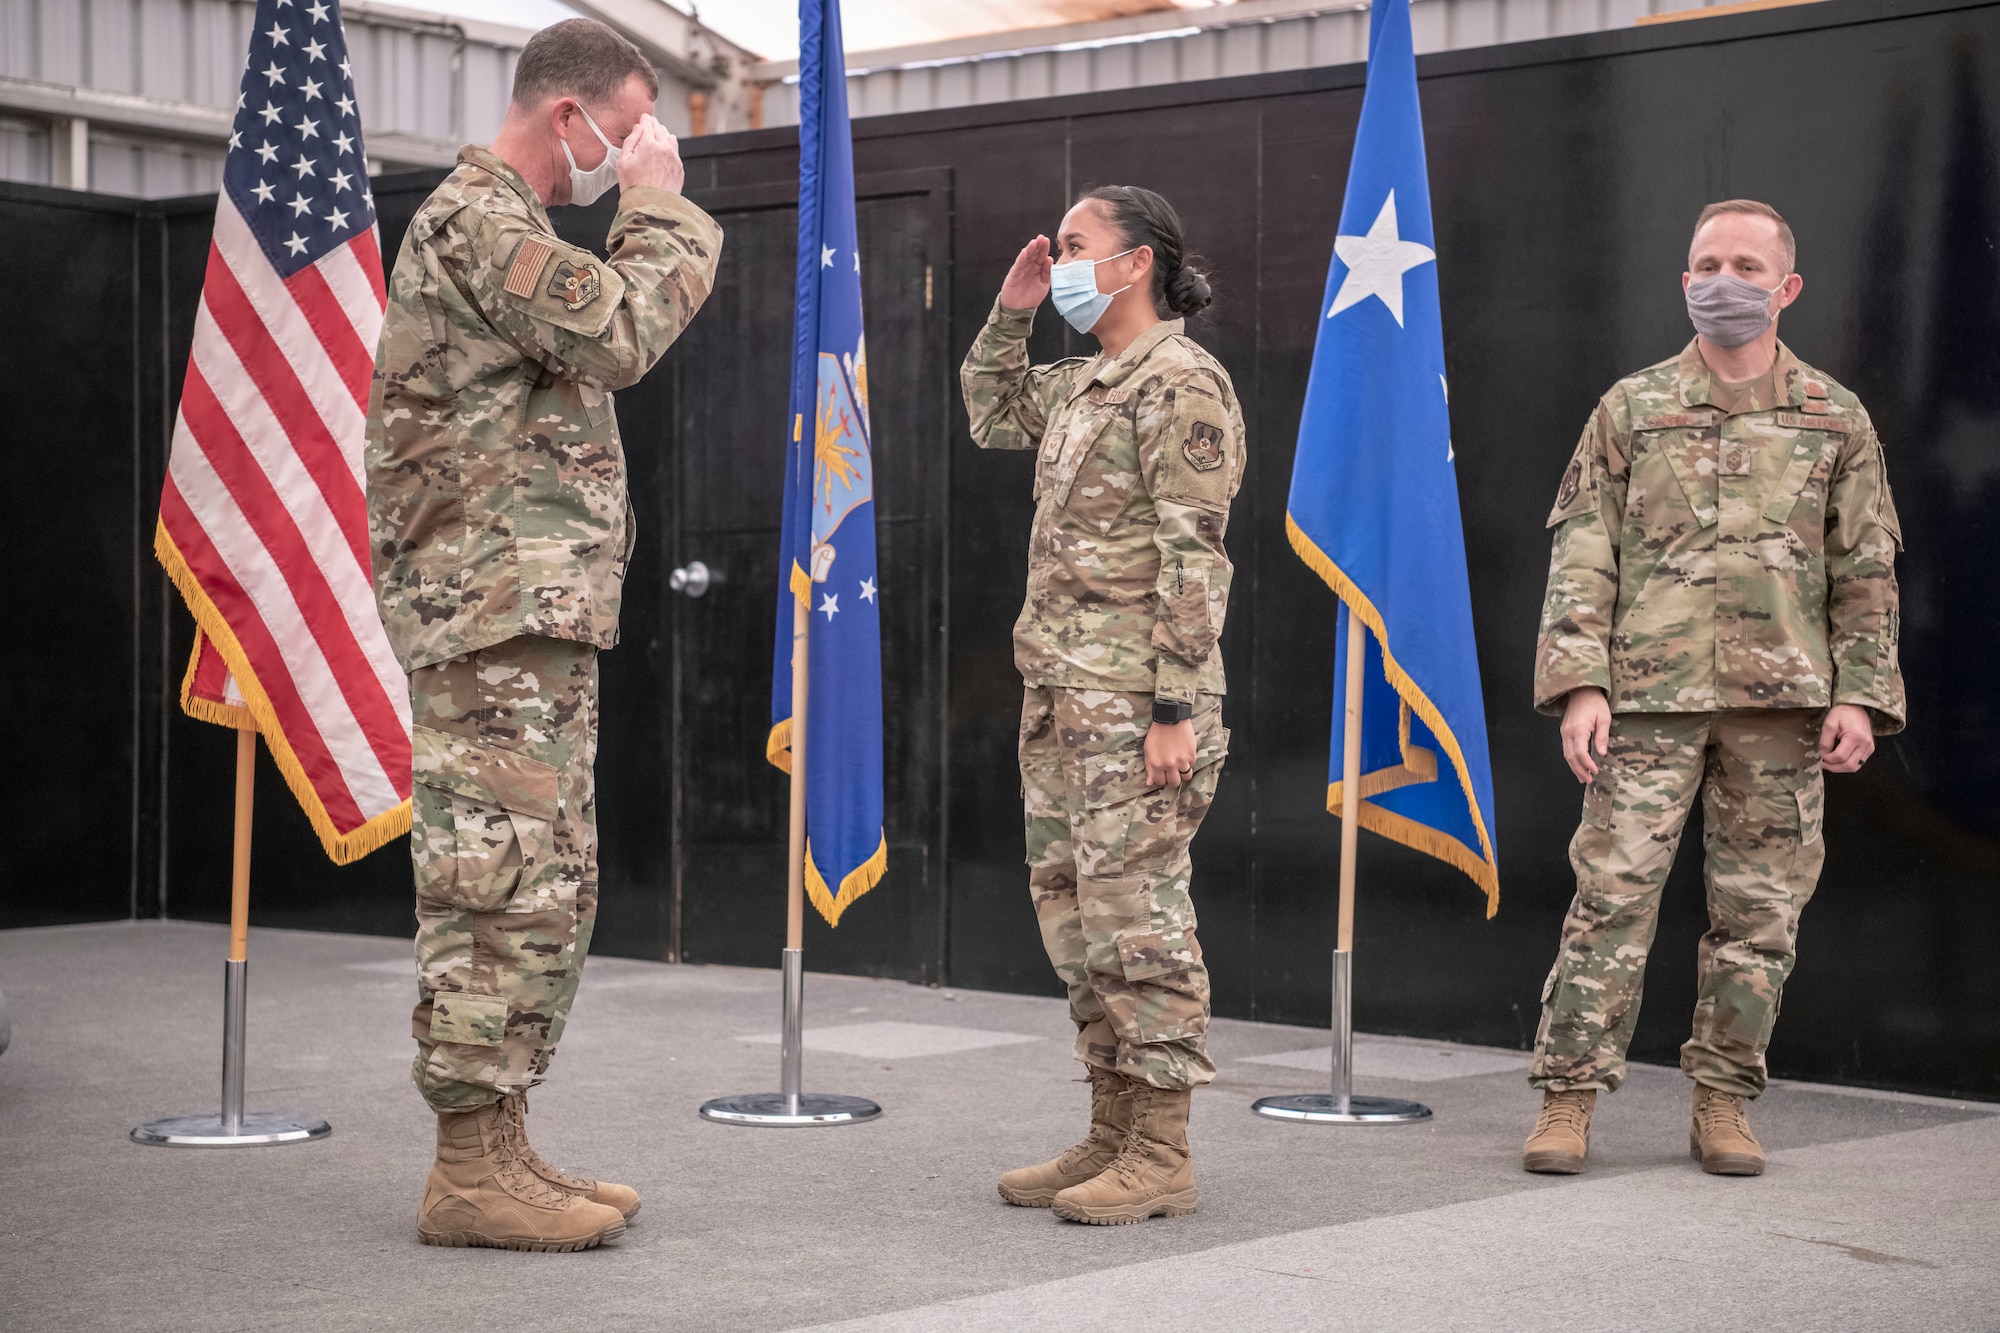 Lt. Gen. Greg Guillot, U.S. Air Forces Central commander, and Senior Airman Erika Louise Ramirez, 380th Expeditionary Medical Group, render a salute during a coining ceremony as Chief Master Sgt. John Storms, U.S. Air Forces Central command chief, observes during an all-call at Al Dhafra Air Base, United Arab Emirates, Sept. 27, 2020